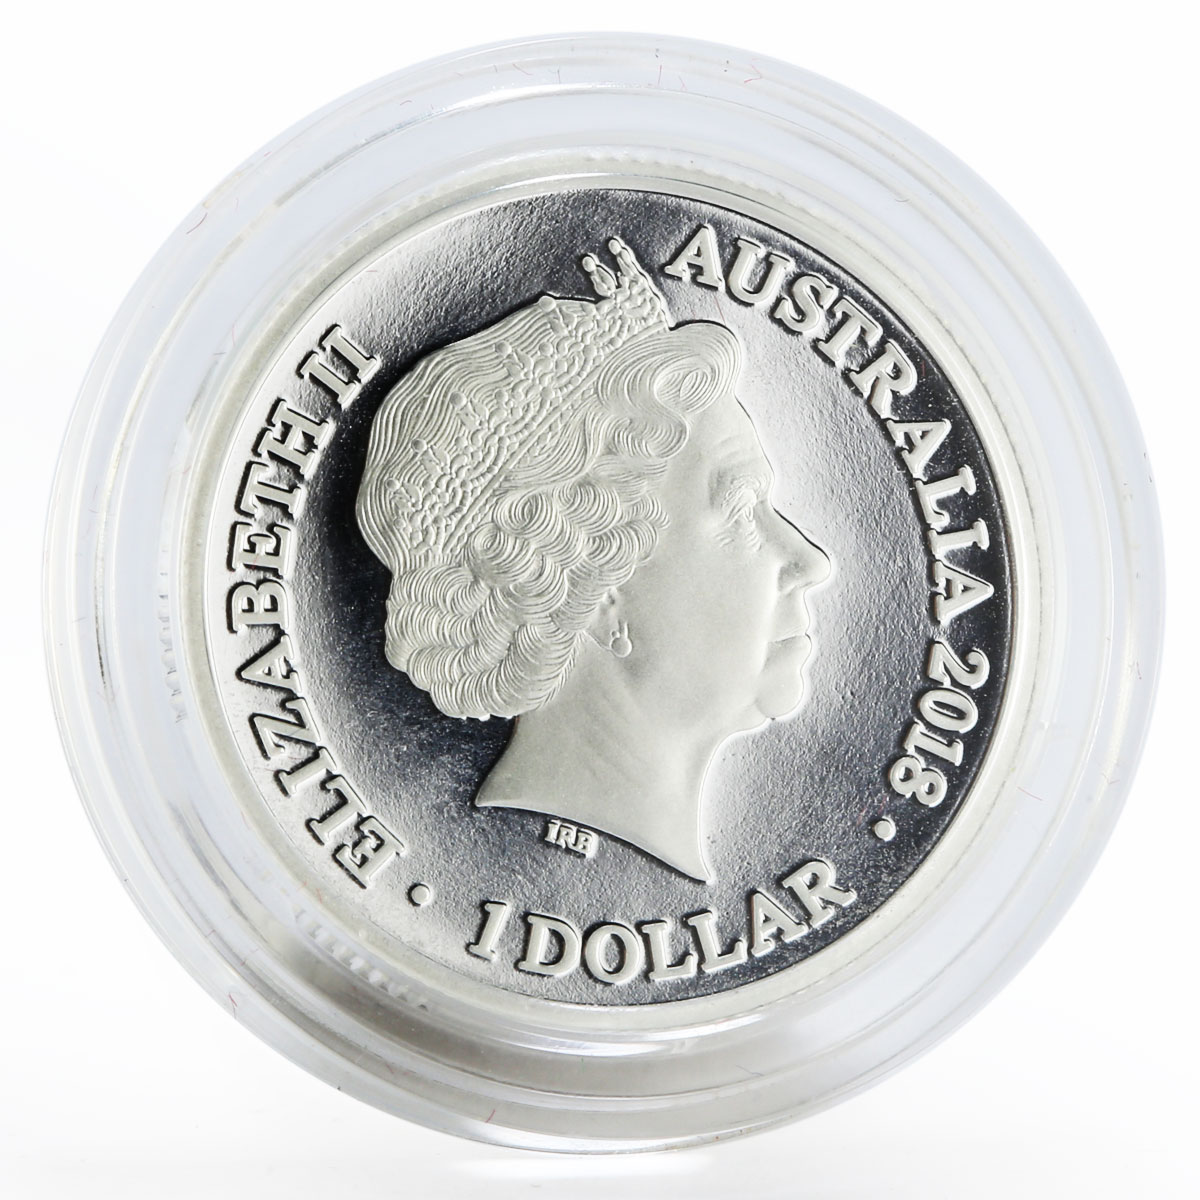 Australia 1 dollar Lunar Series Year of the Dog proof silver coin 2018